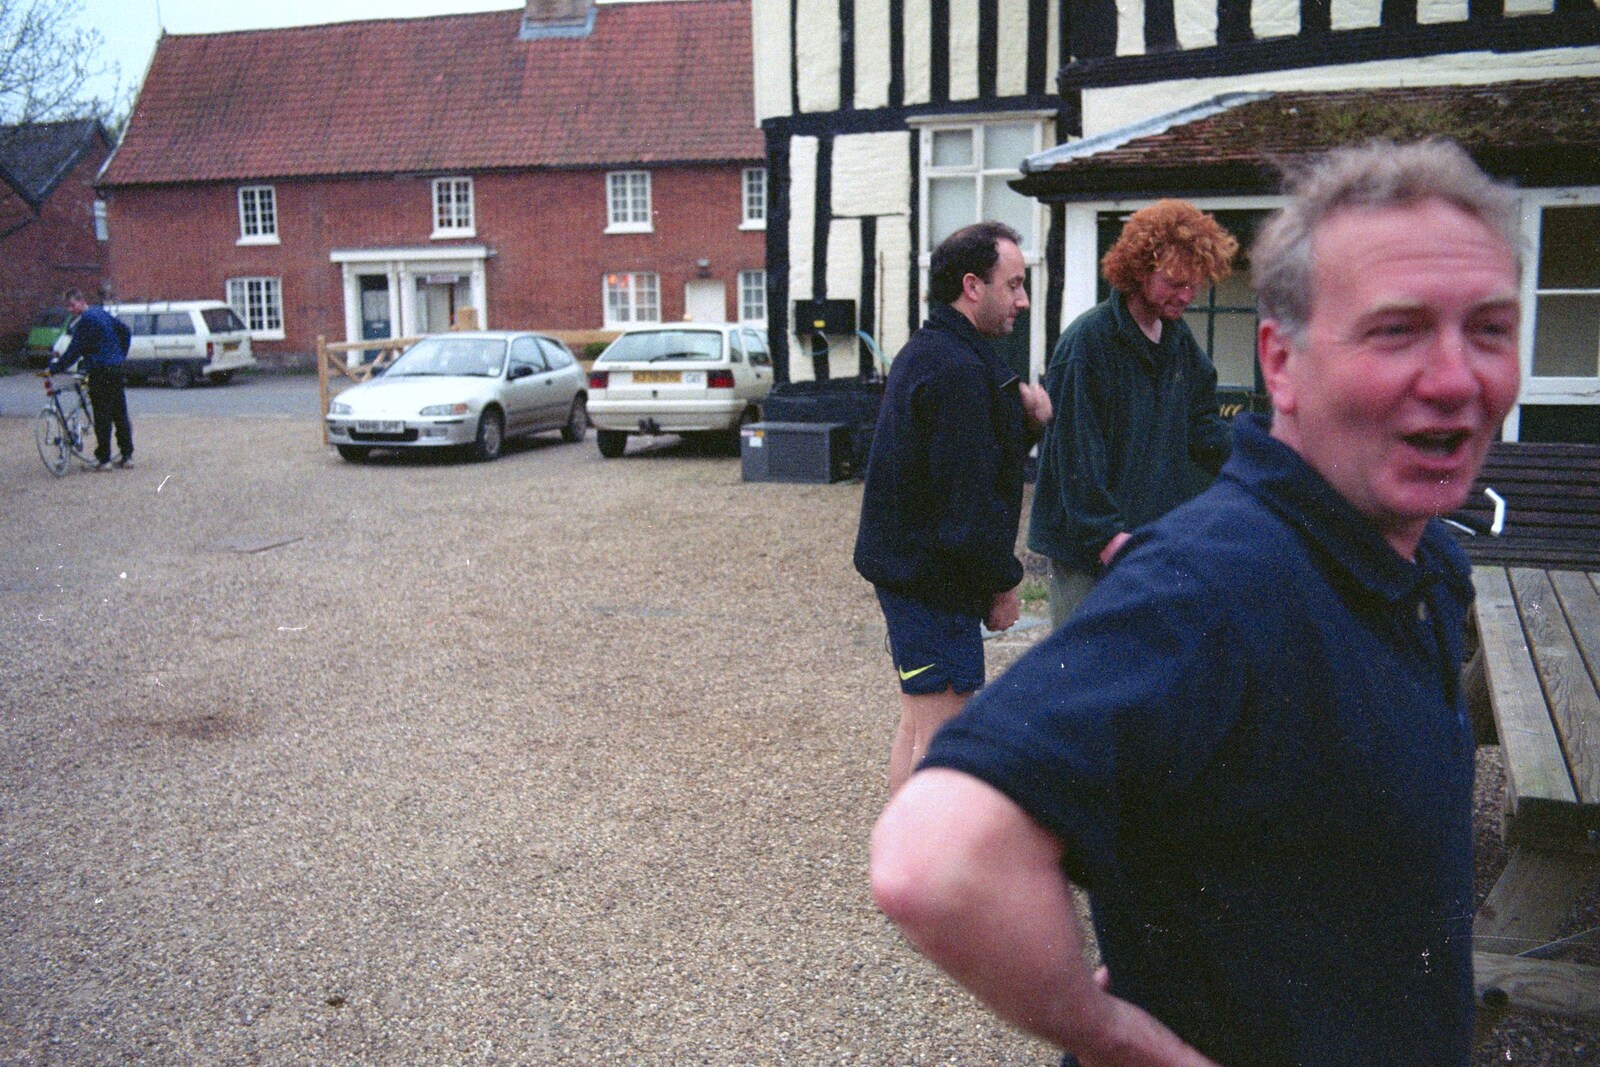 John Willy outside the Hoxne Swan from A BSCC Bike Ride, Brockdish Greyhound and Hoxne Swan, Suffolk - 4th May 2000